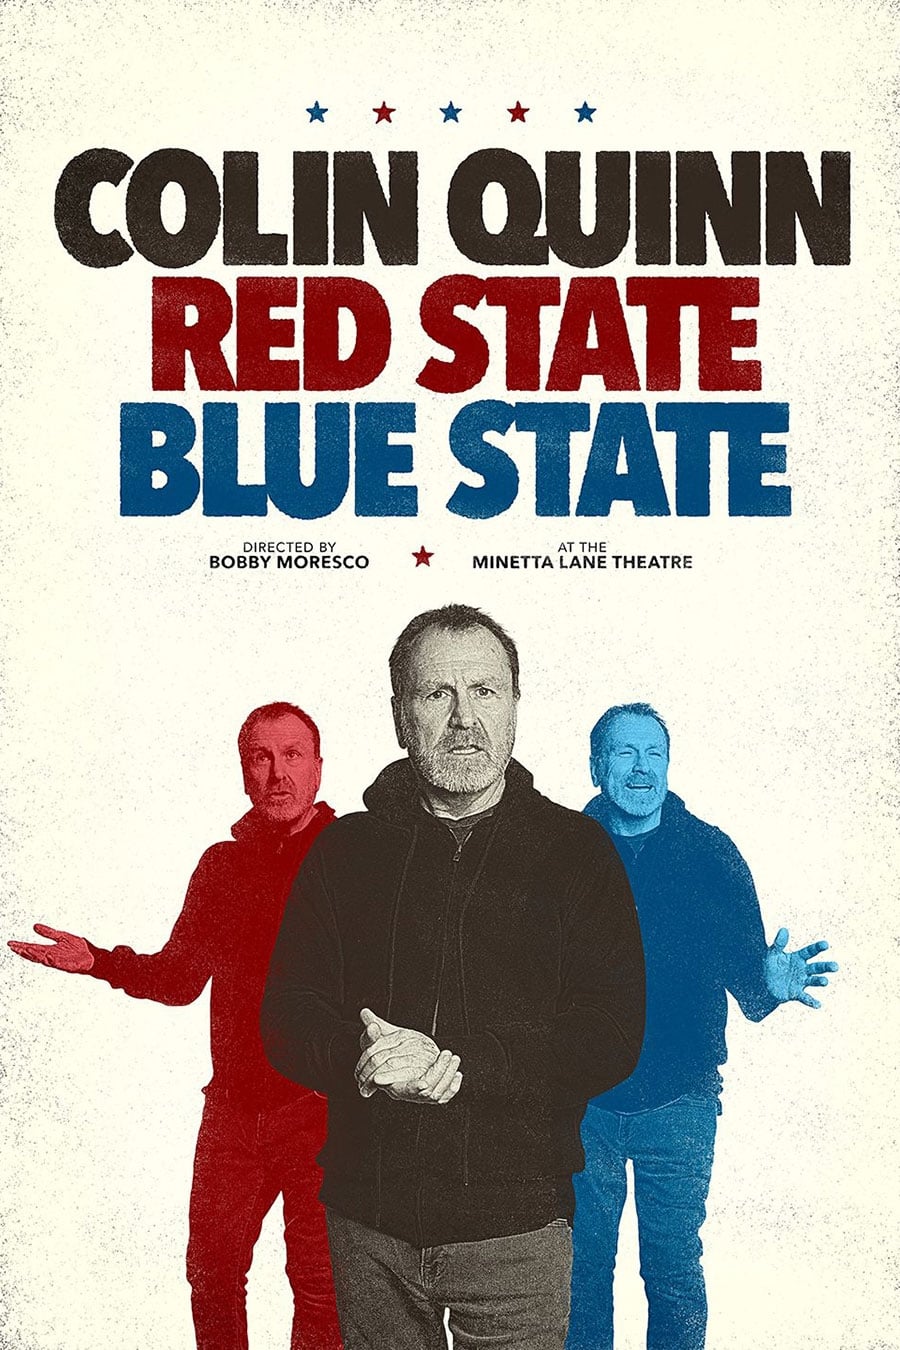 Colin Quinn: Red State, Blue State (2019)